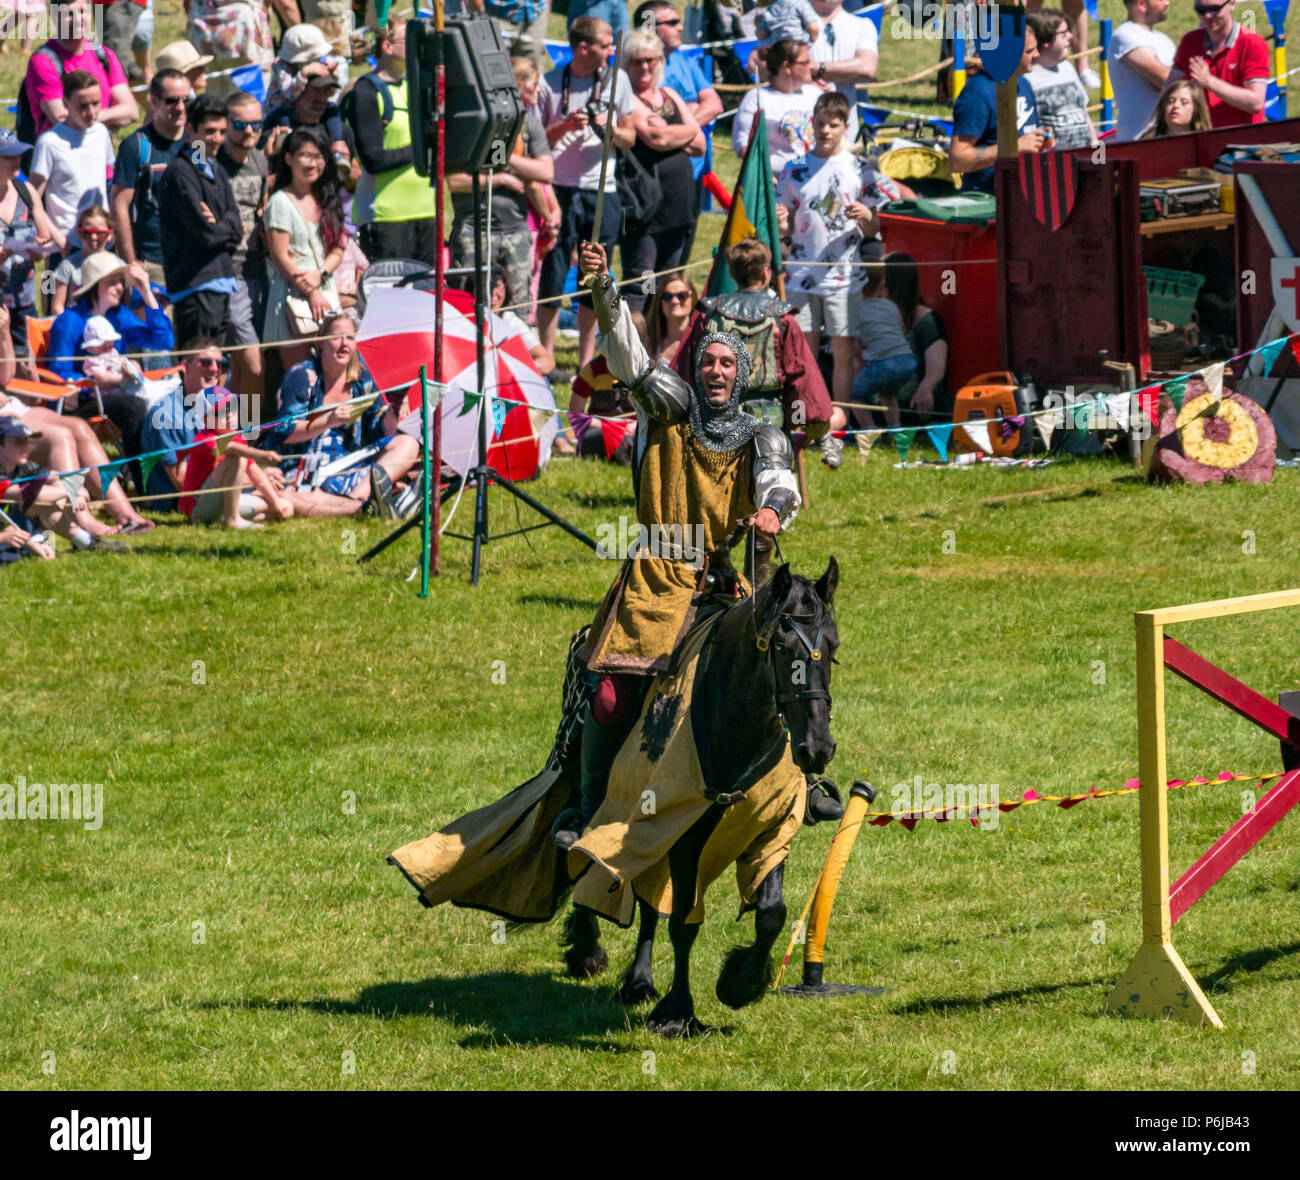 Jousting and Medieval Fair at Linlithgow Palace, Linlithgow, Scotland, United Kingdom, 30th June 2018. Historic Environment Scotland kick off their summer entertainment programme with a fabulous display of Medieval jousting in the grounds of the historic castle. The jousting is performed by Les Amis D'Onno equine stunt team. A knight rides a horse Stock Photo